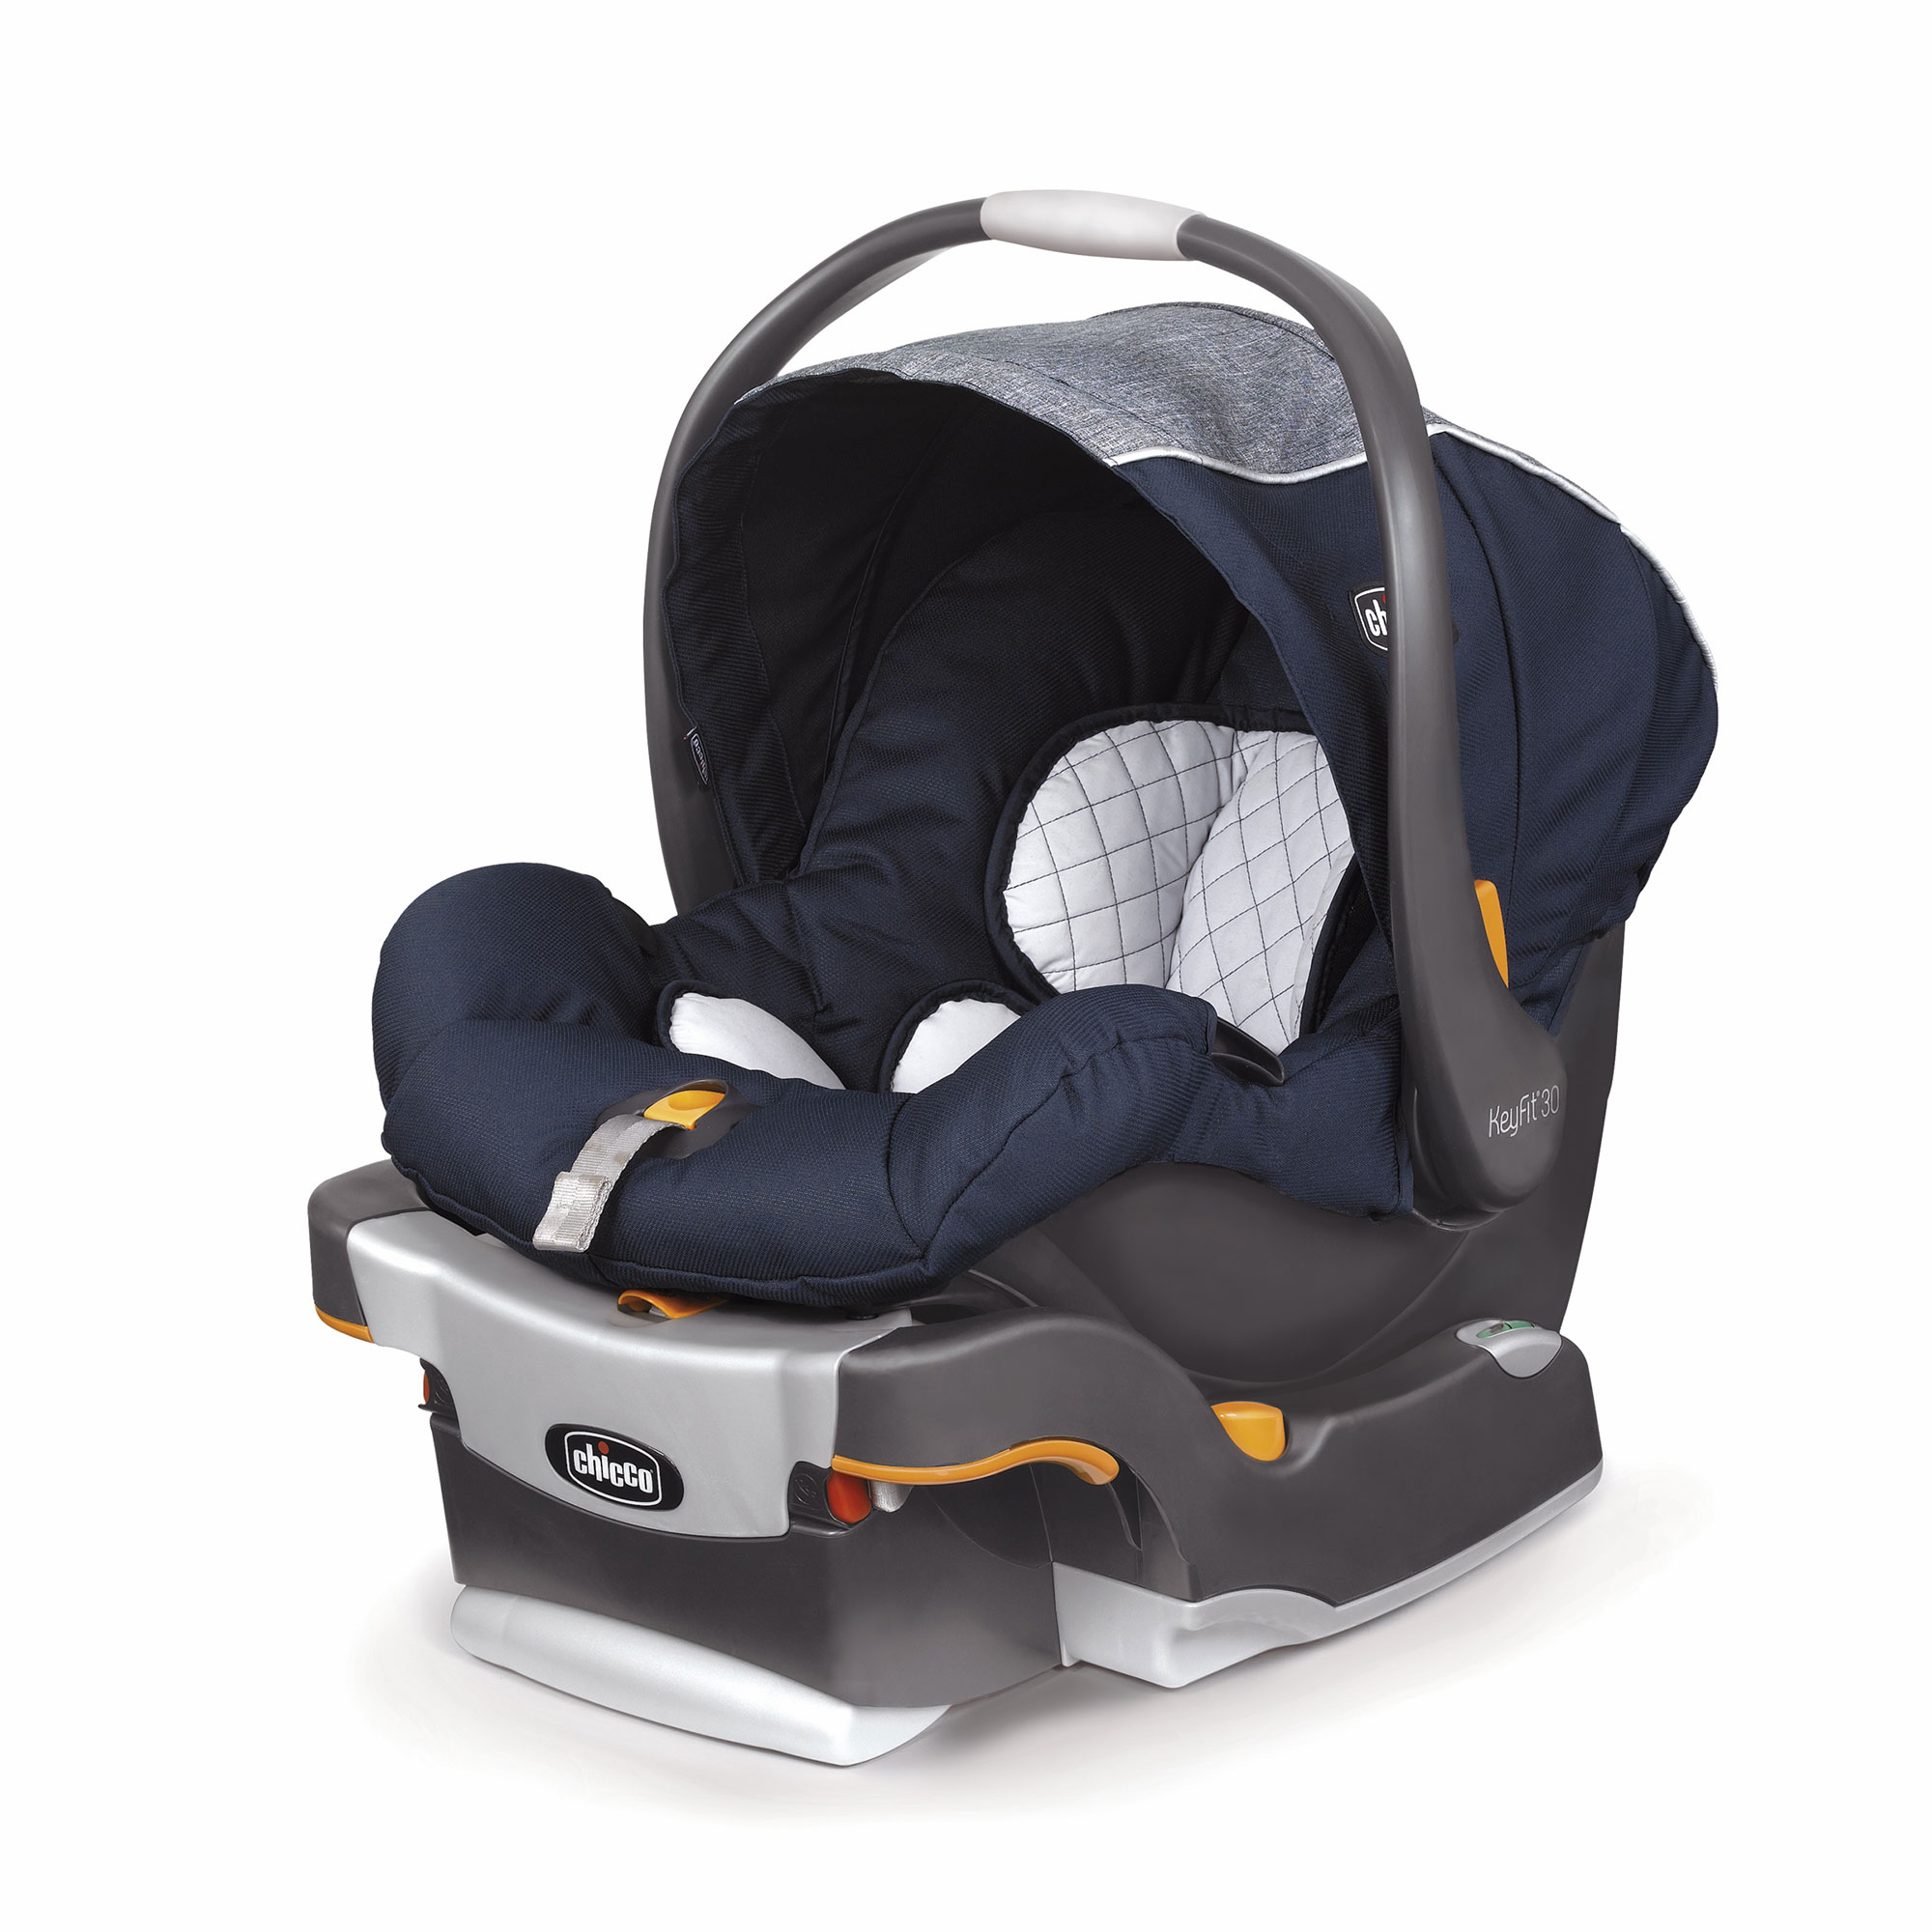 Free Shipping!!! Isle Brand New Chicco KeyFit Magic 30 Infant Car Seat 